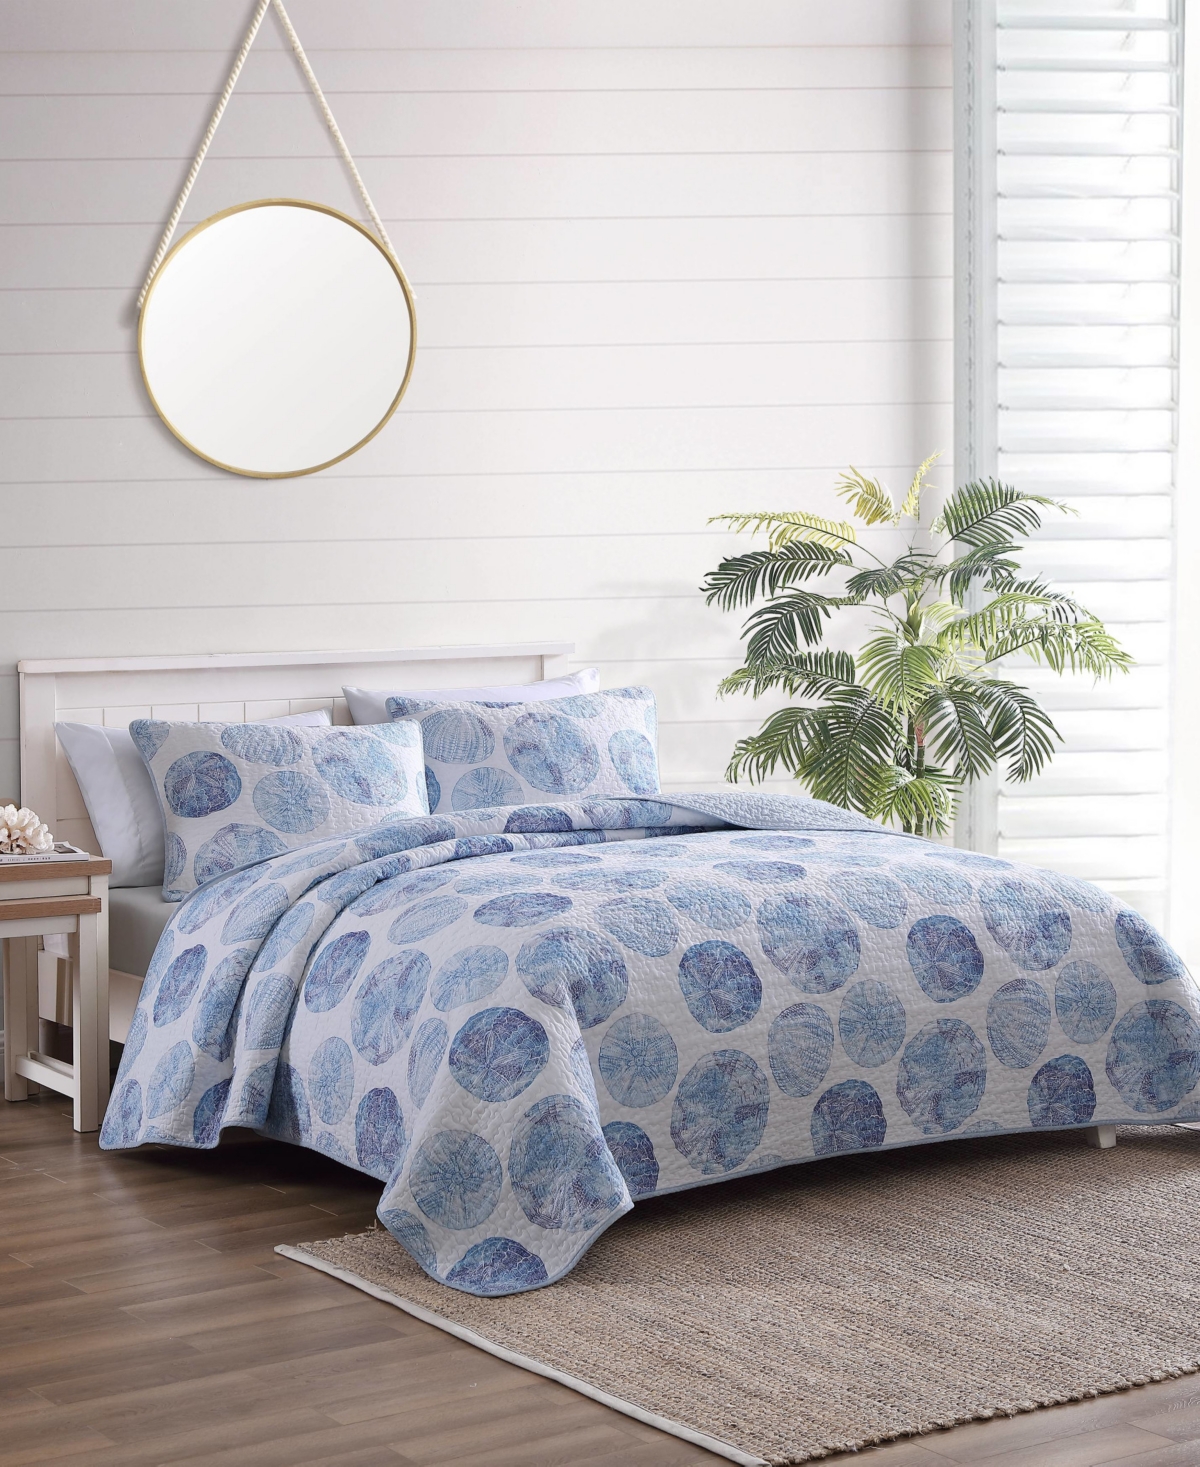 TOMMY BAHAMA HOME TOMMY BAHAMA OCEAN ISLE 2-PC. QUILT SET, TWIN BEDDING